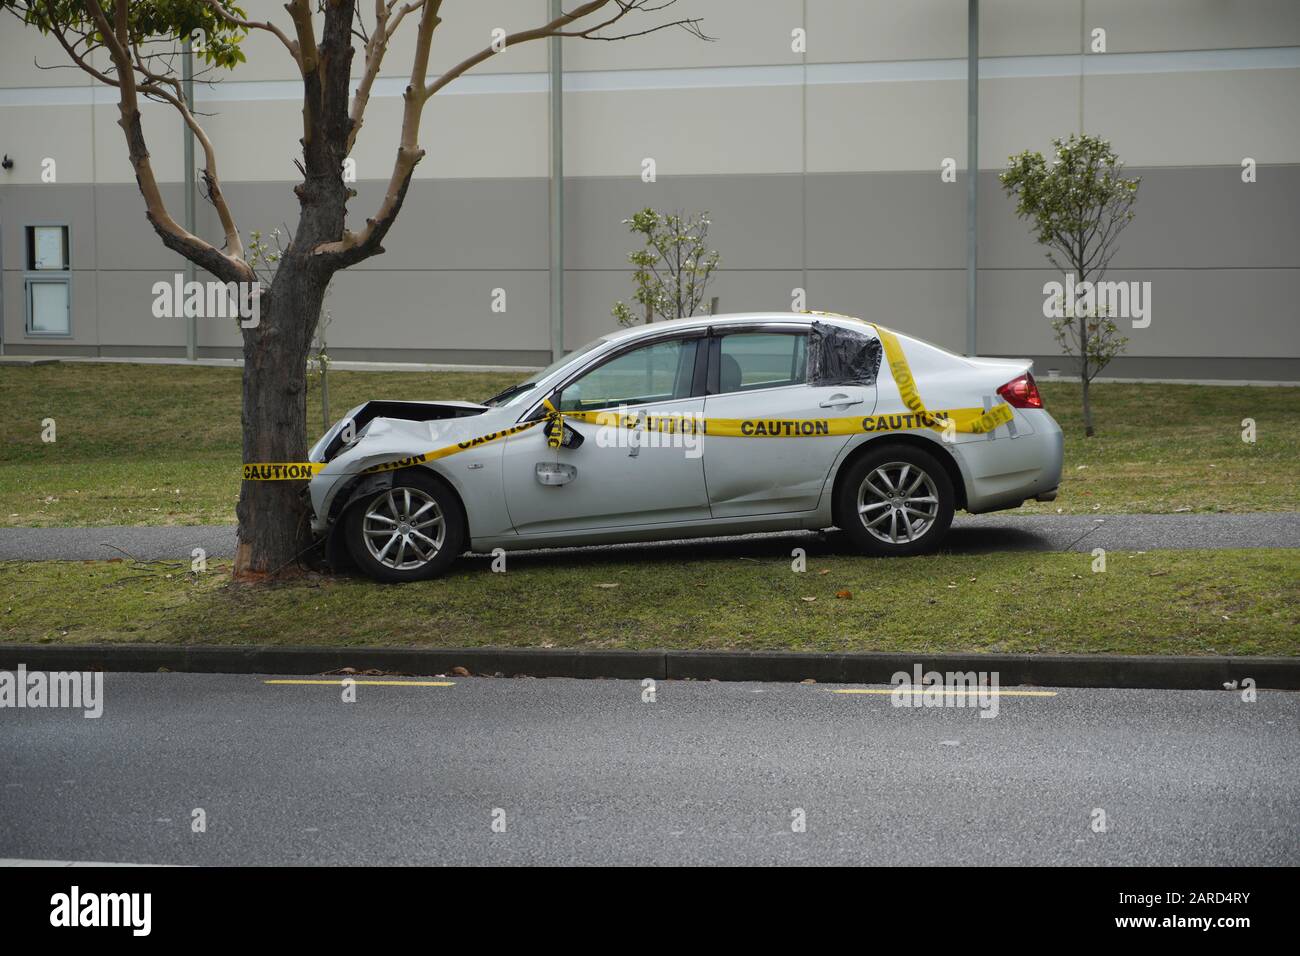 Silver sedan car mounted pavement crash crashed head on into tree yellow caution warning tape wrapped around, Auckland, New Zealand. Stock Photo